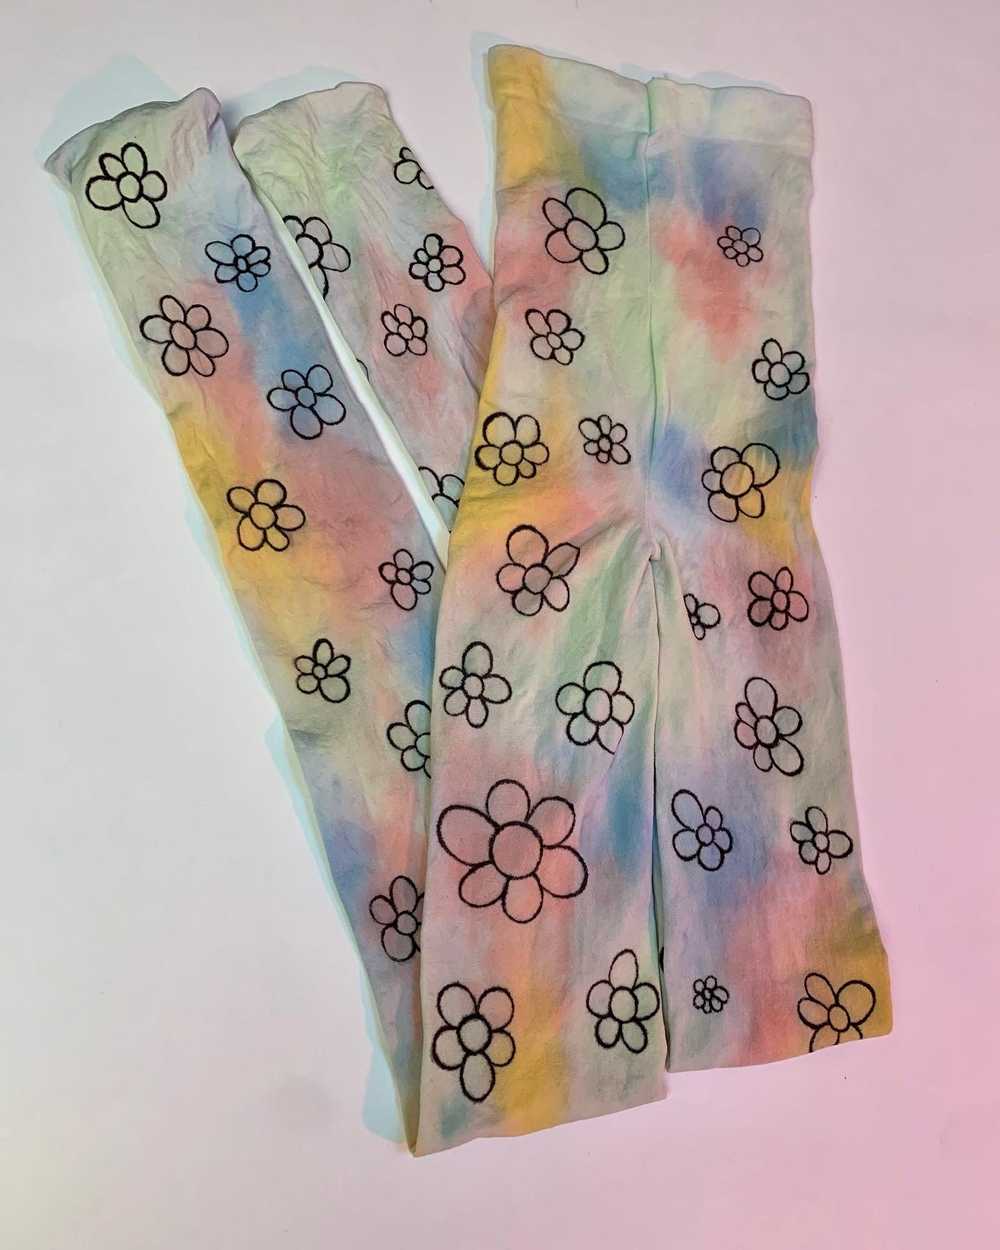 Recycled daisy rainbow dyed tights - image 3